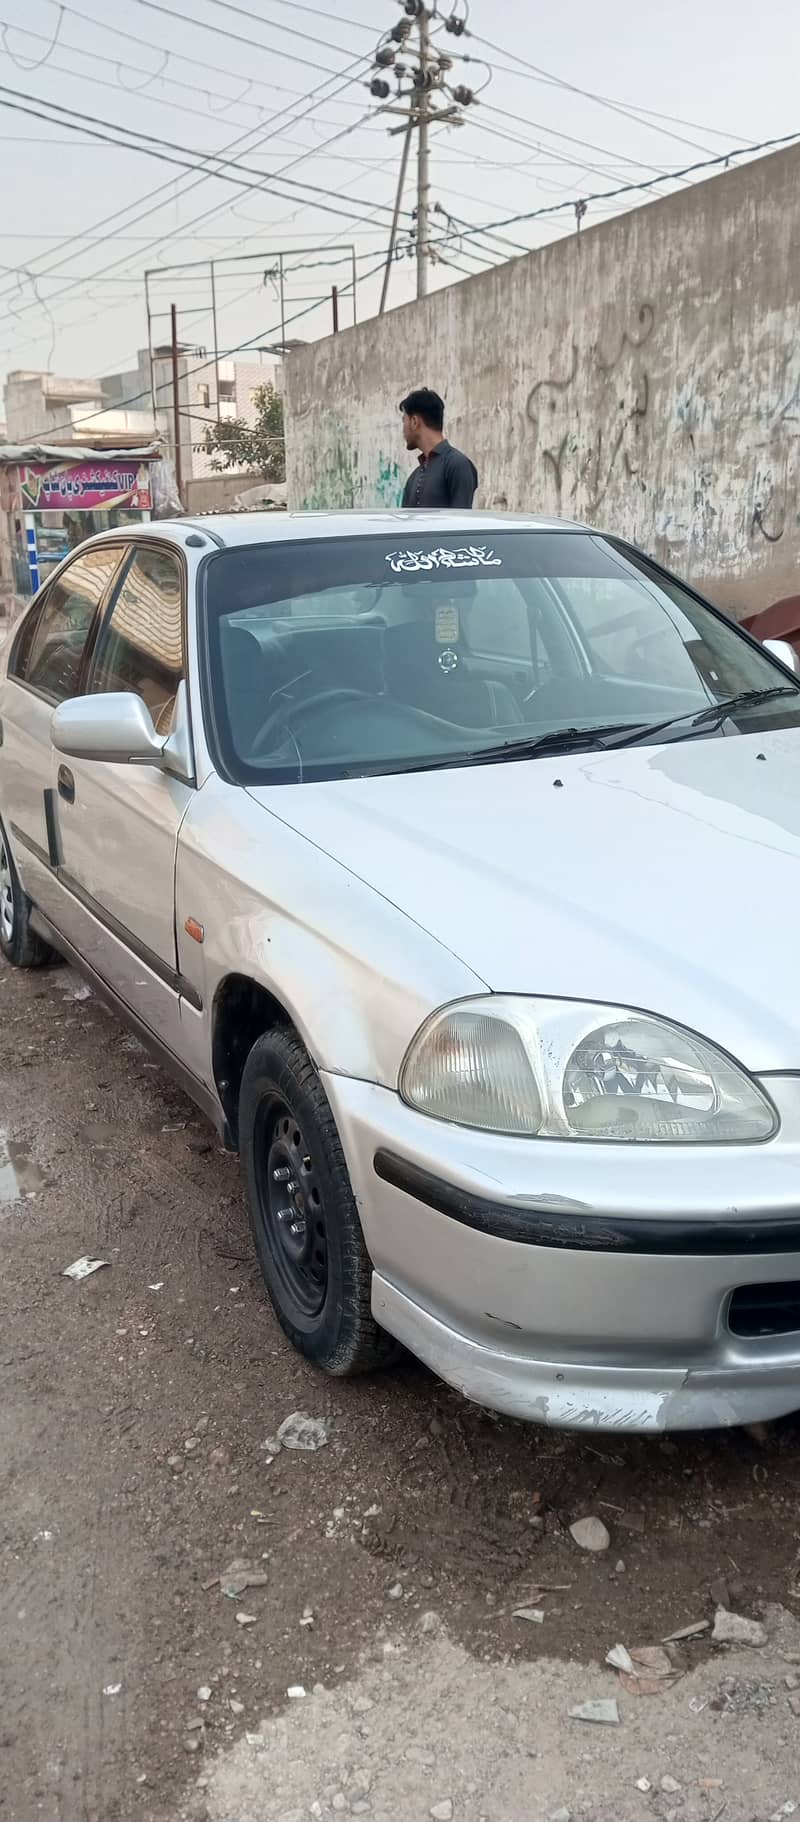 Honda Civic 1996 exchange possible with good car 6